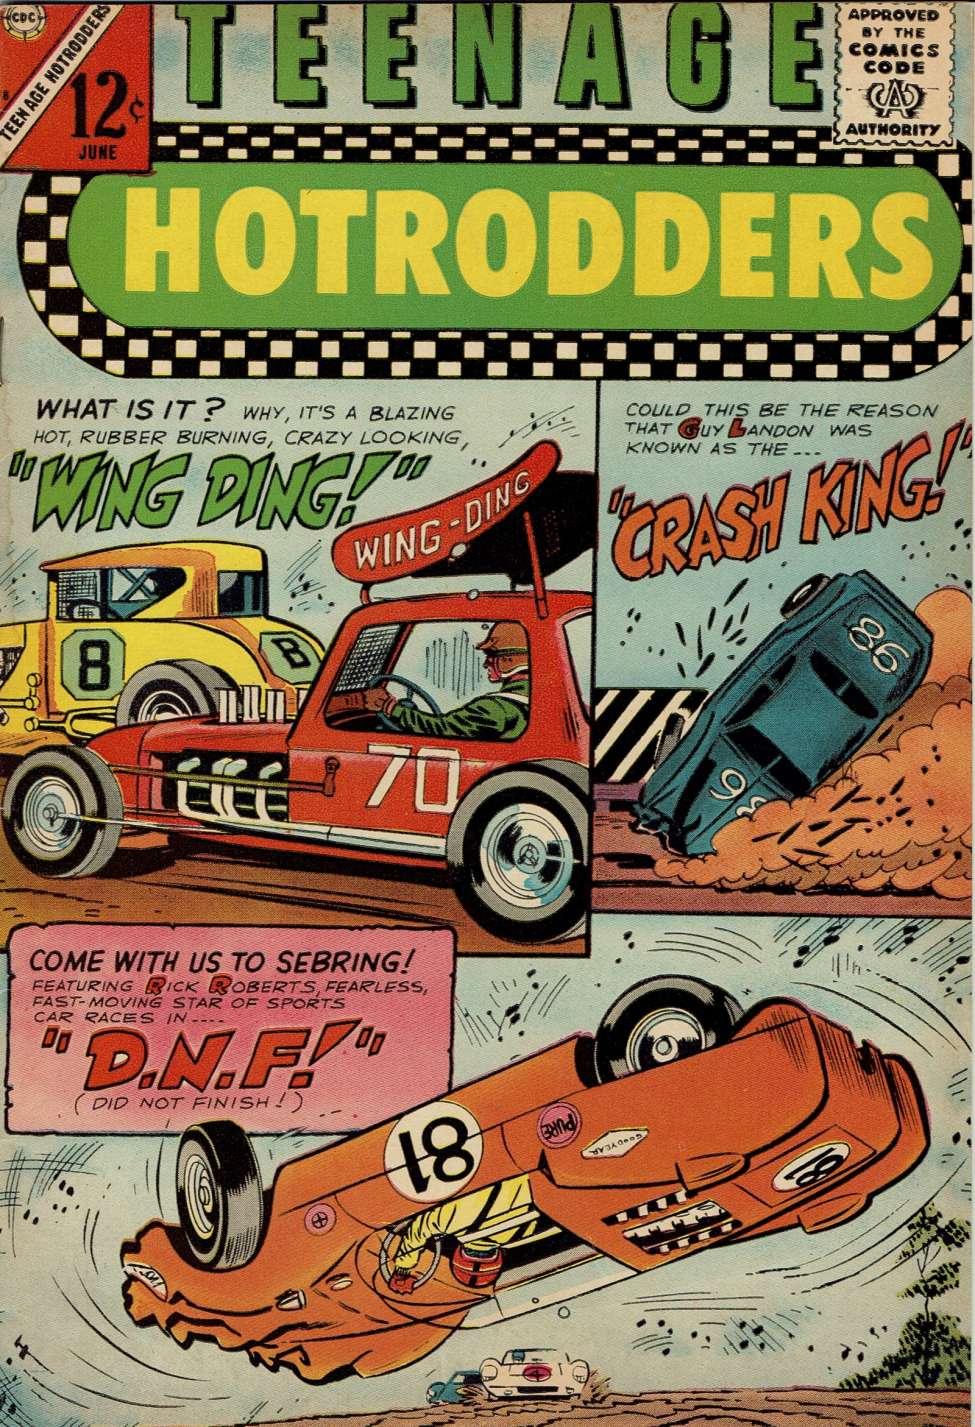 Book Cover For Teenage Hotrodders 18